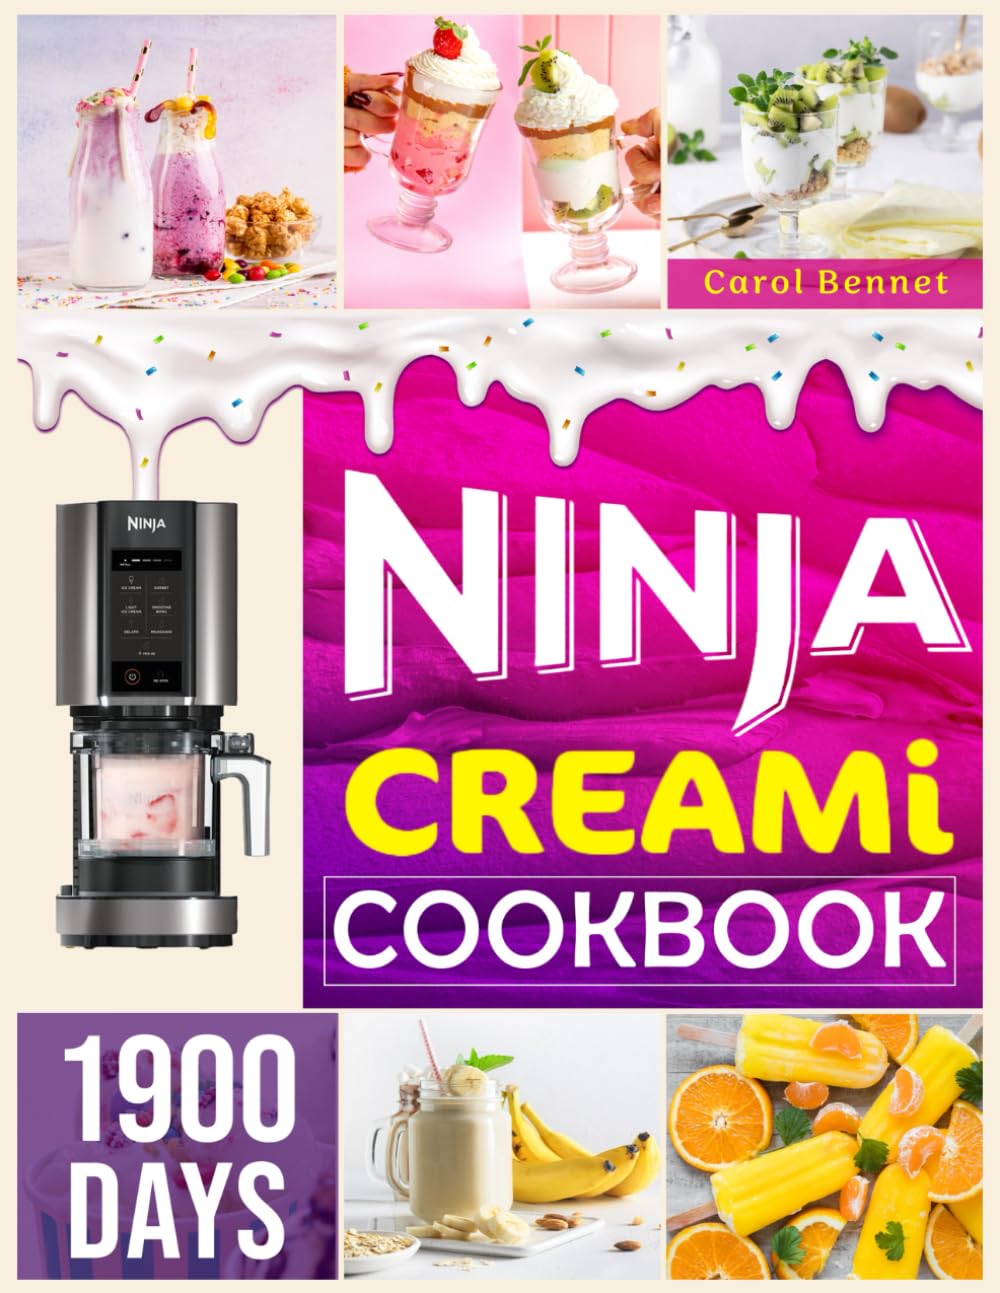 Ninja CREAMI Cookbook: 1900 Days of Delicious and Tasty Recipes, From Basic Ice Creams to Gourmet Sorbets, Smoothies and Shakes for Every Occasion